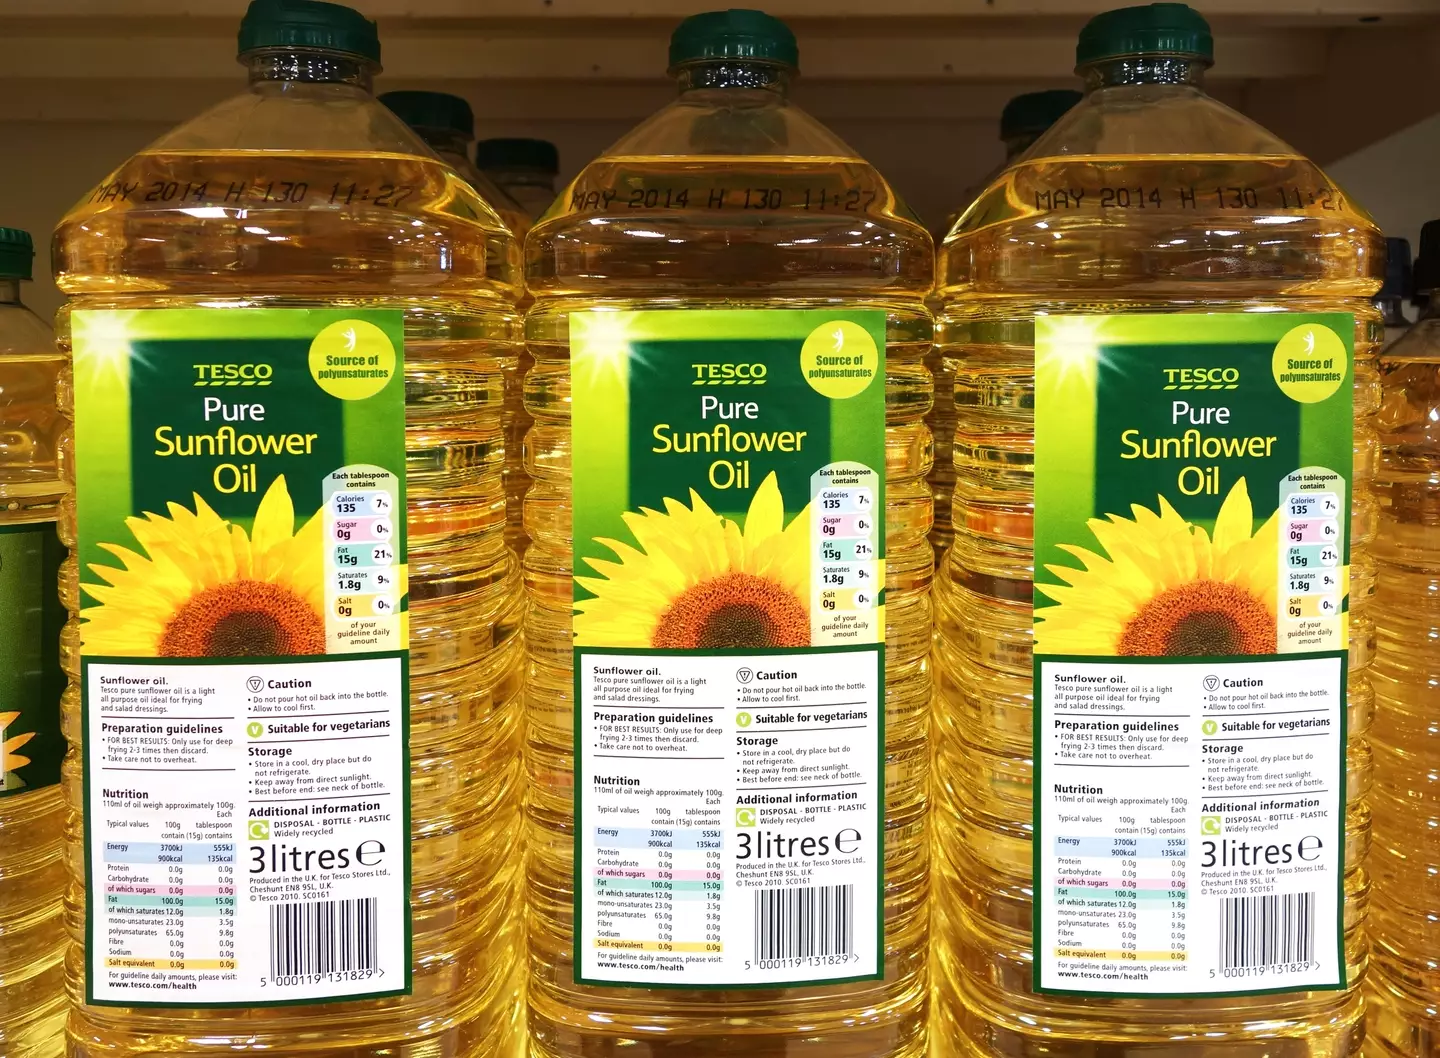 Olive, rapeseed and sunflower oils are all being limited by various supermarkets.